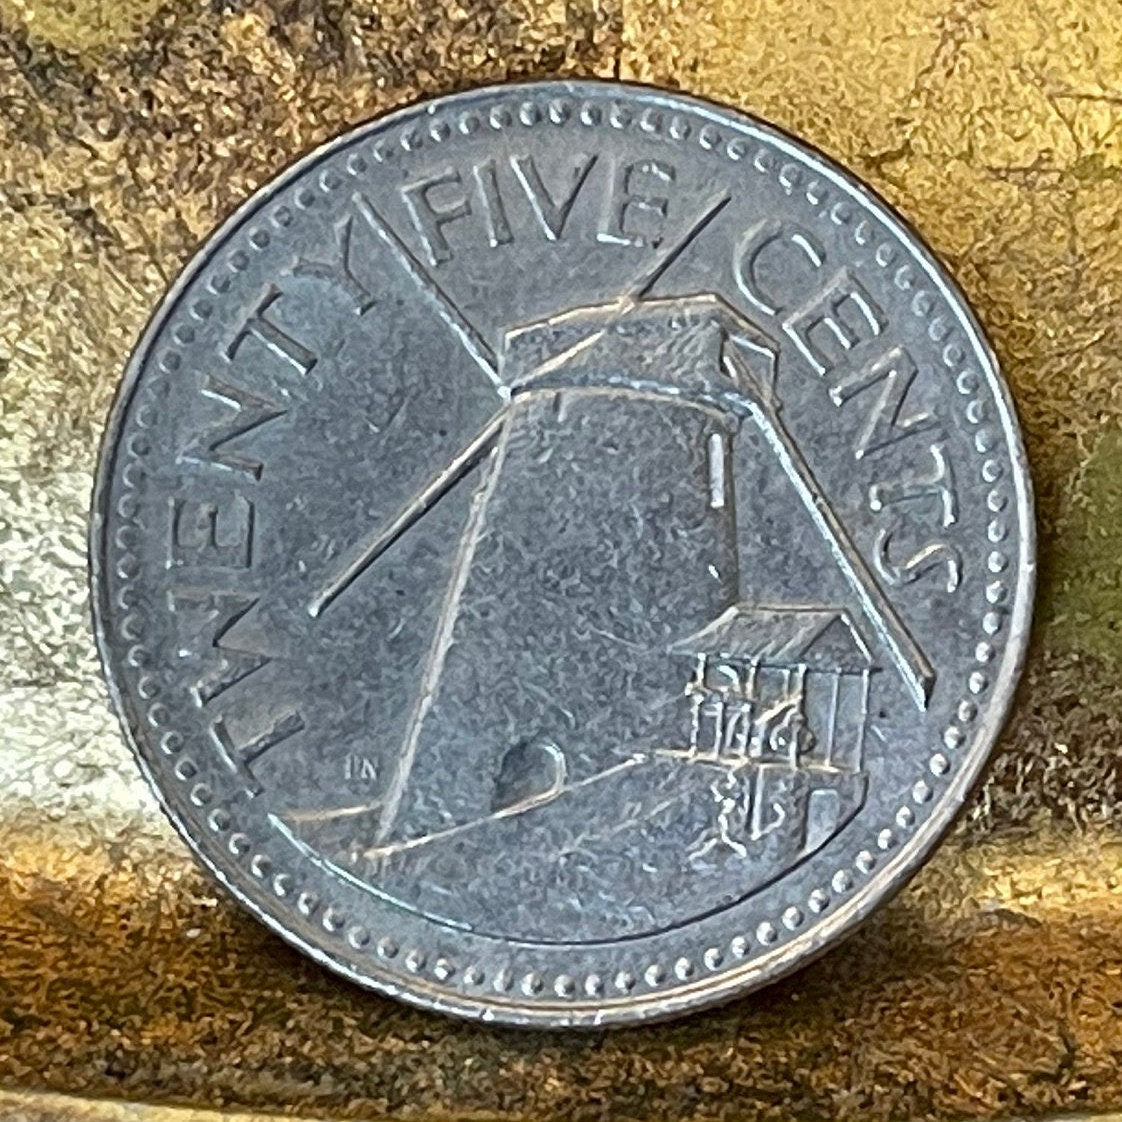 Sugar Windmill 25 Cents Barbados Authentic Coin Money for Jewelry and Craft Making (Morgan Lewis Windmill)